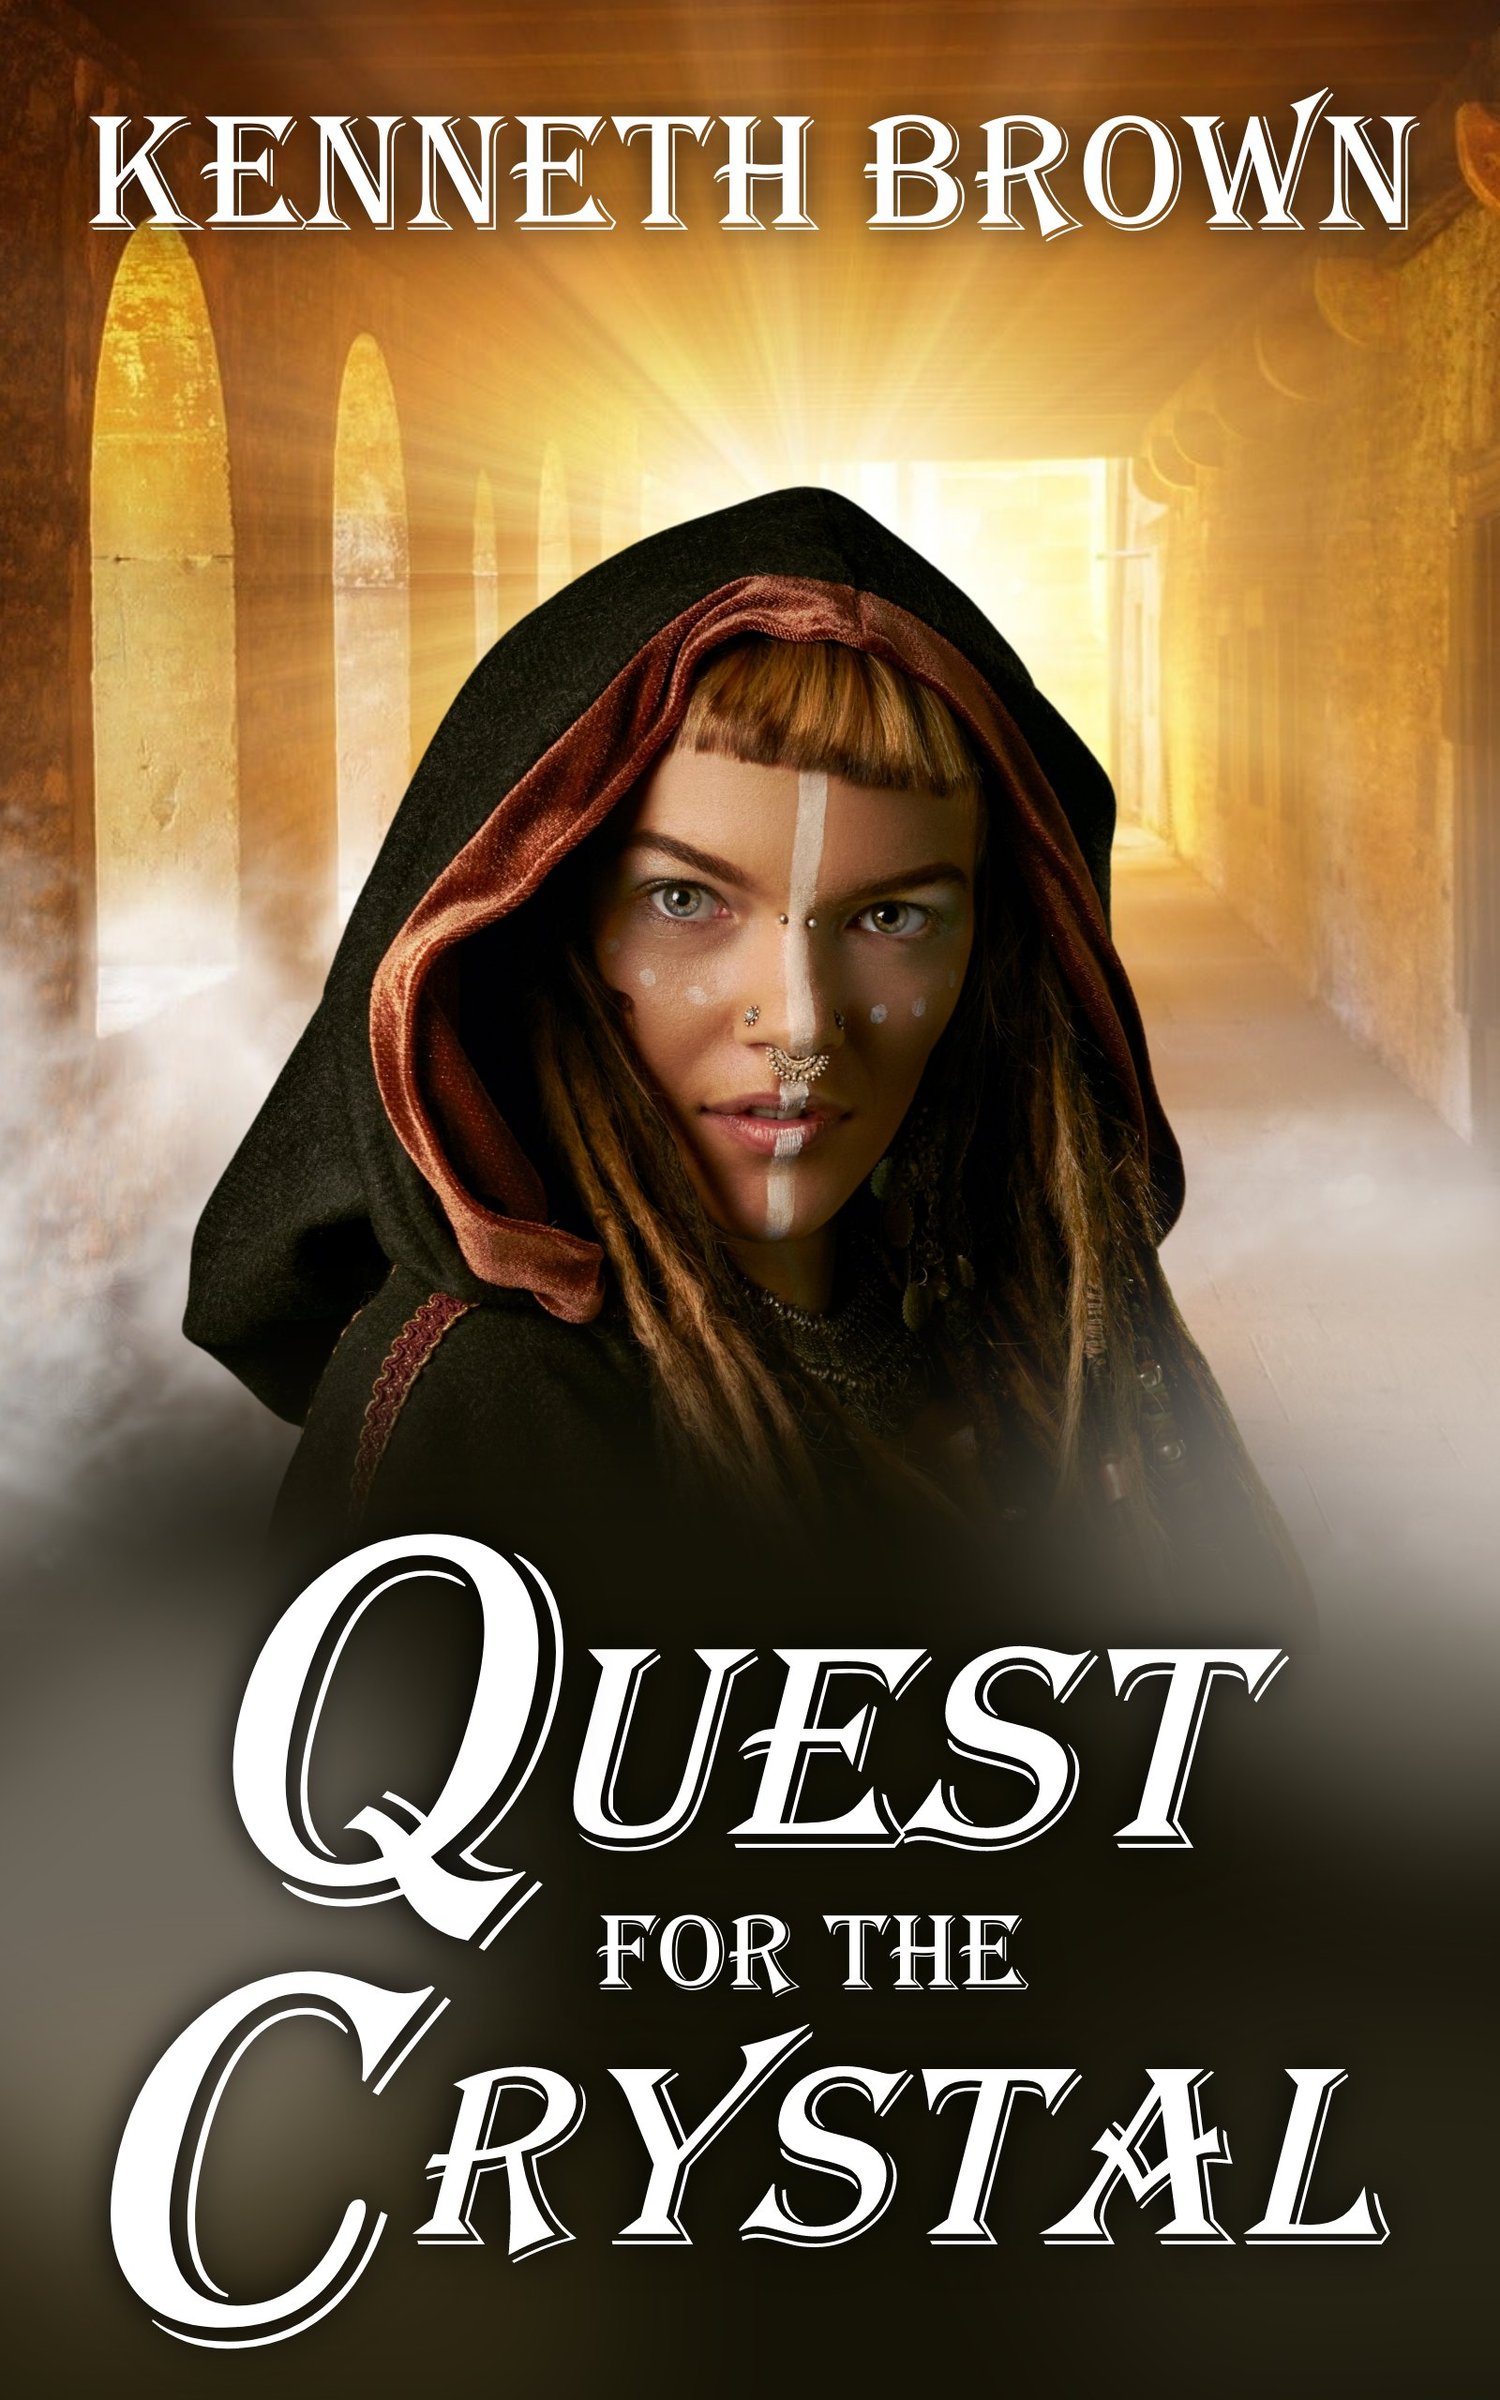 YA Fantasy, Quest for the Crystal, is now available for Pre-Order.